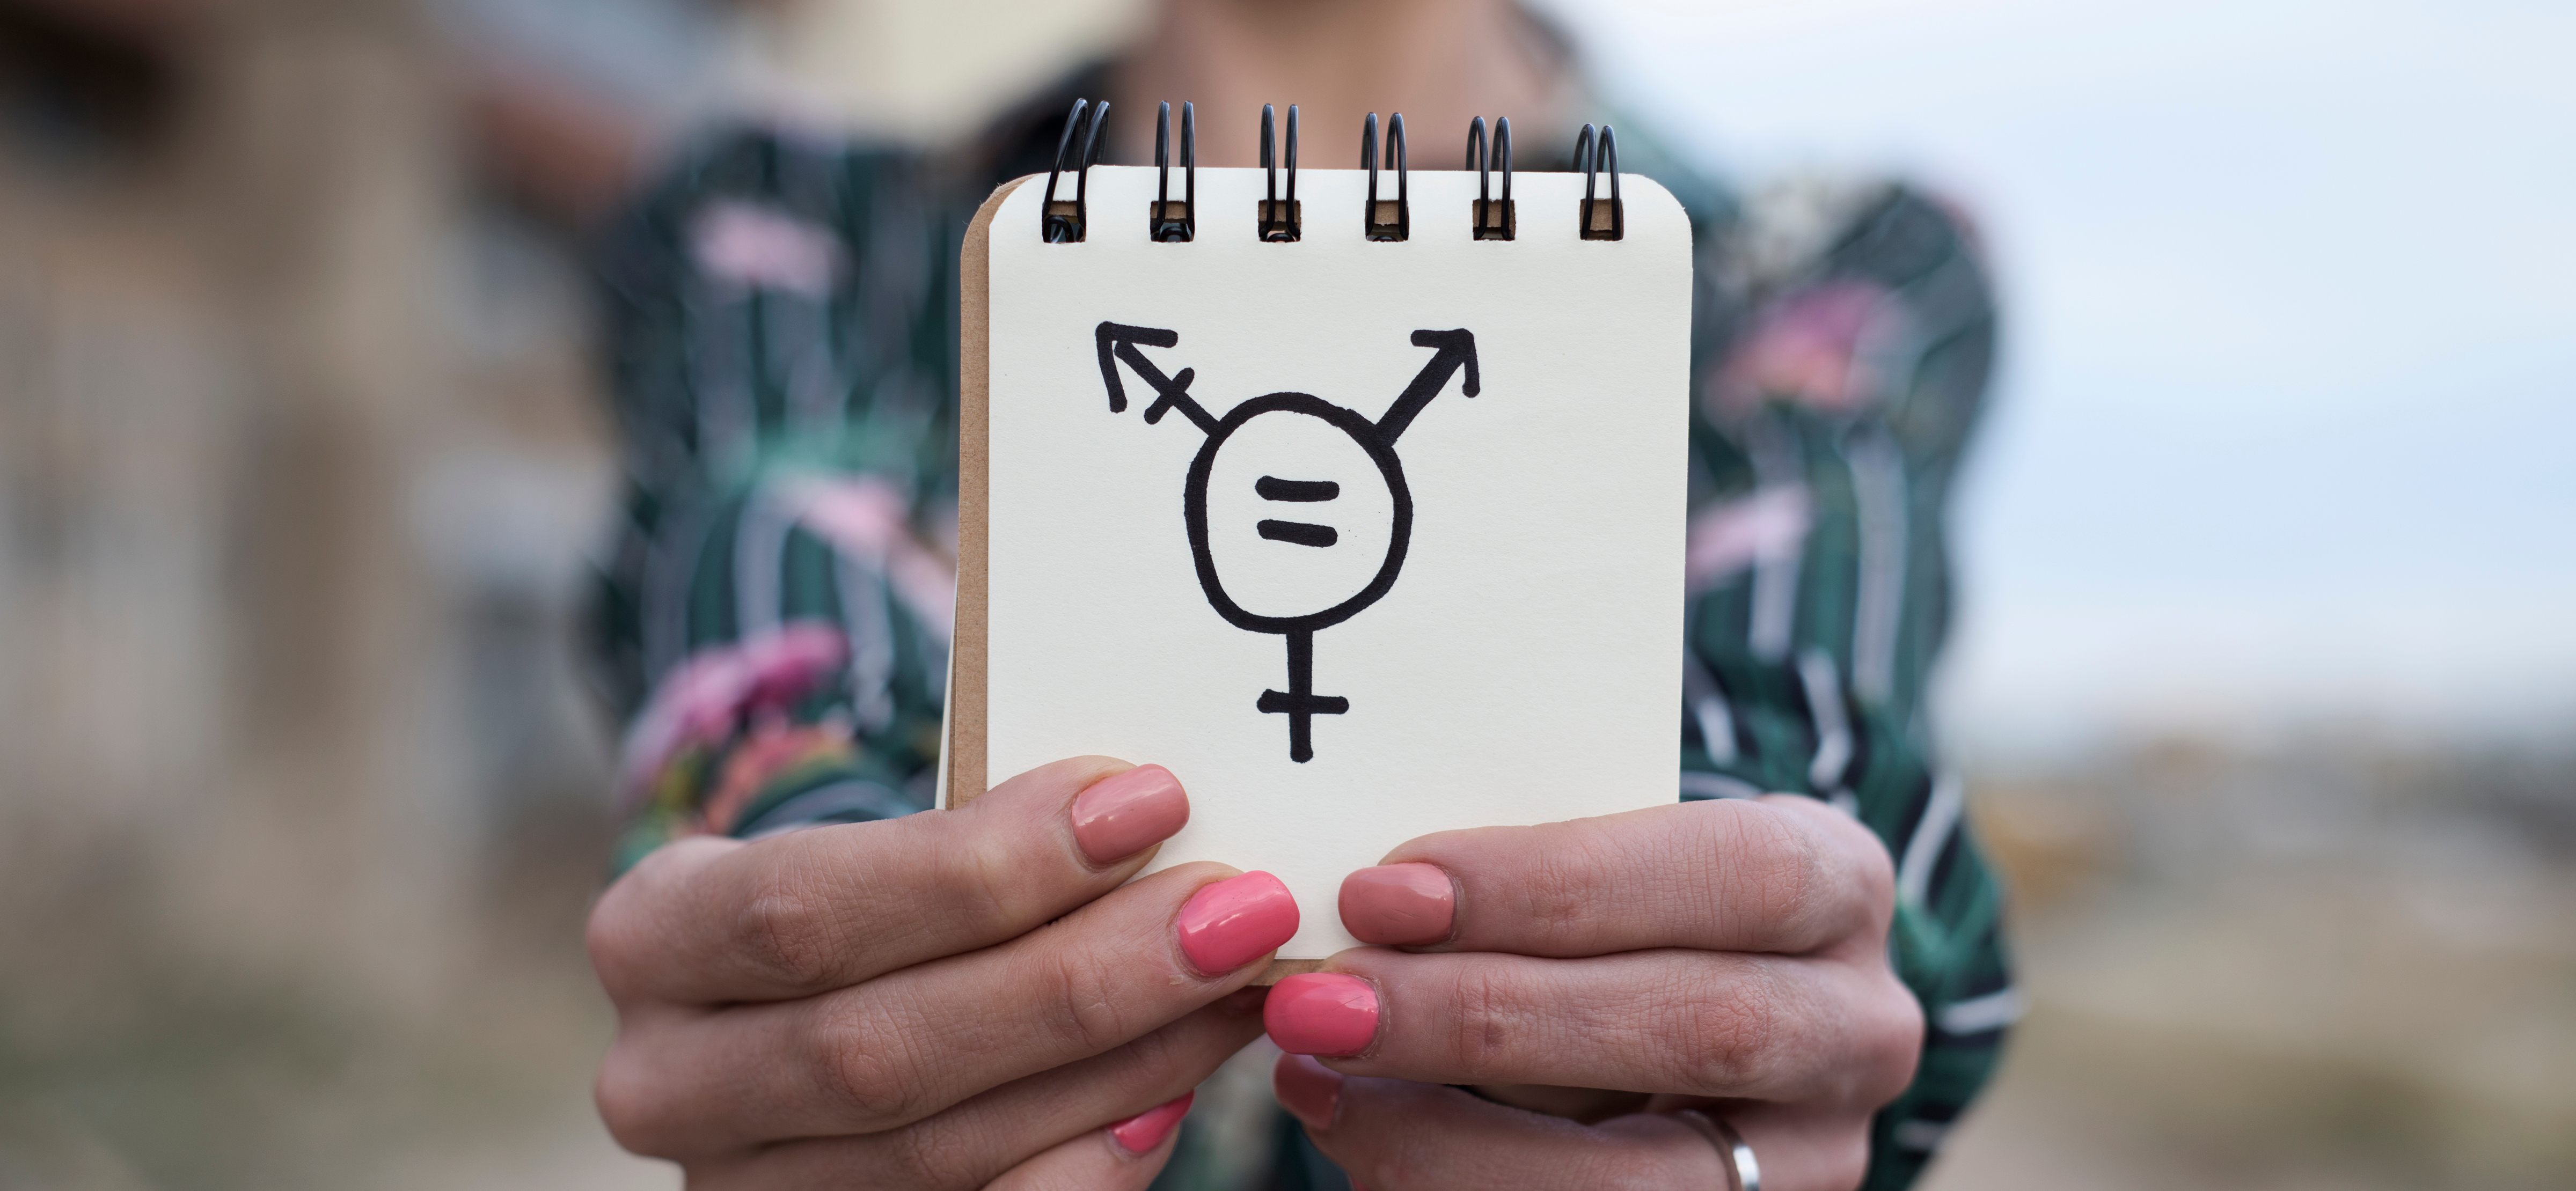 A stock photo of a zoomed in view of a gender equality symbol.